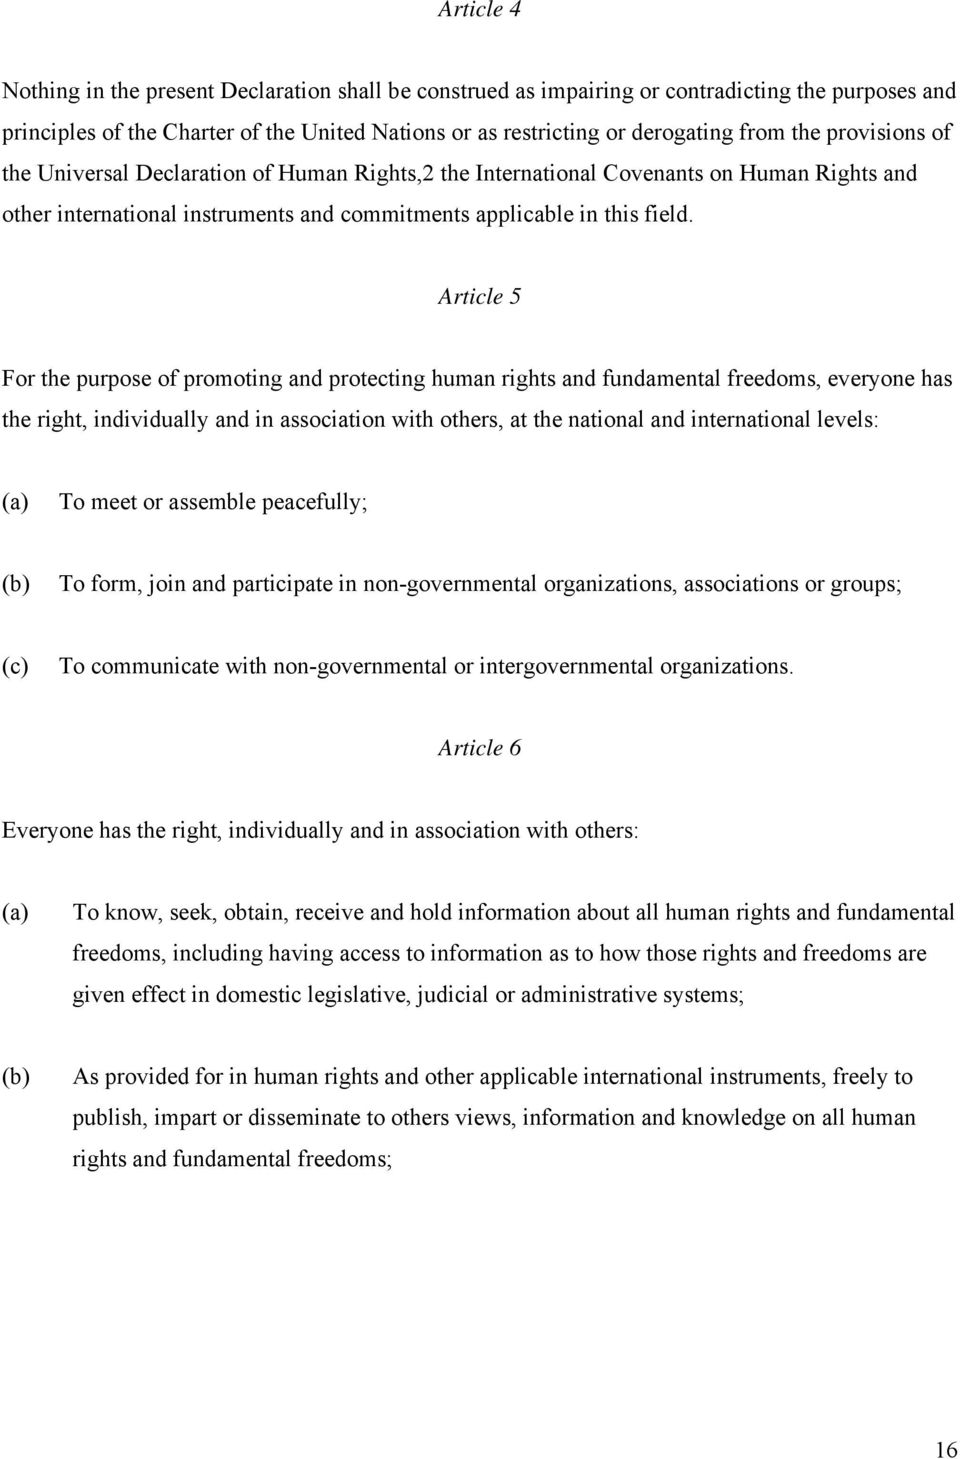 Article 5 For the purpose of promoting and protecting human rights and fundamental freedoms, everyone has the right, individually and in association with others, at the national and international